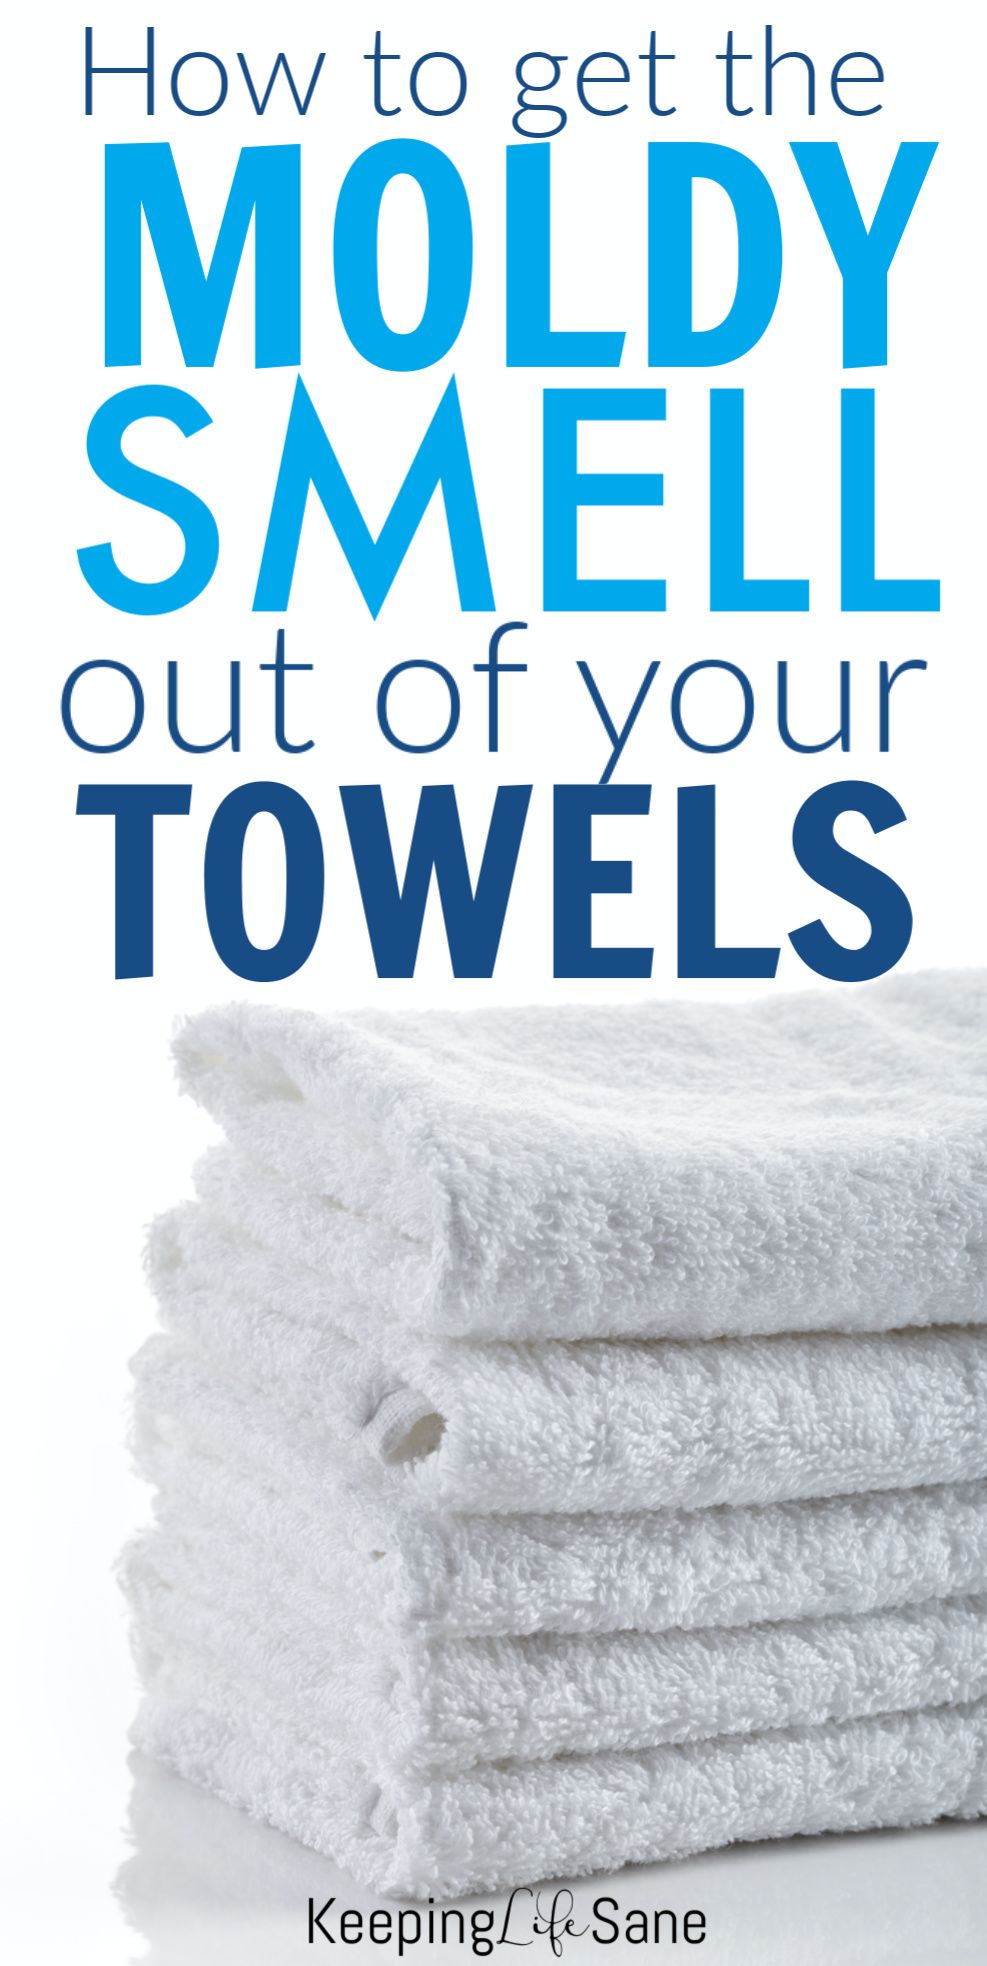 How to get the smell out of towels